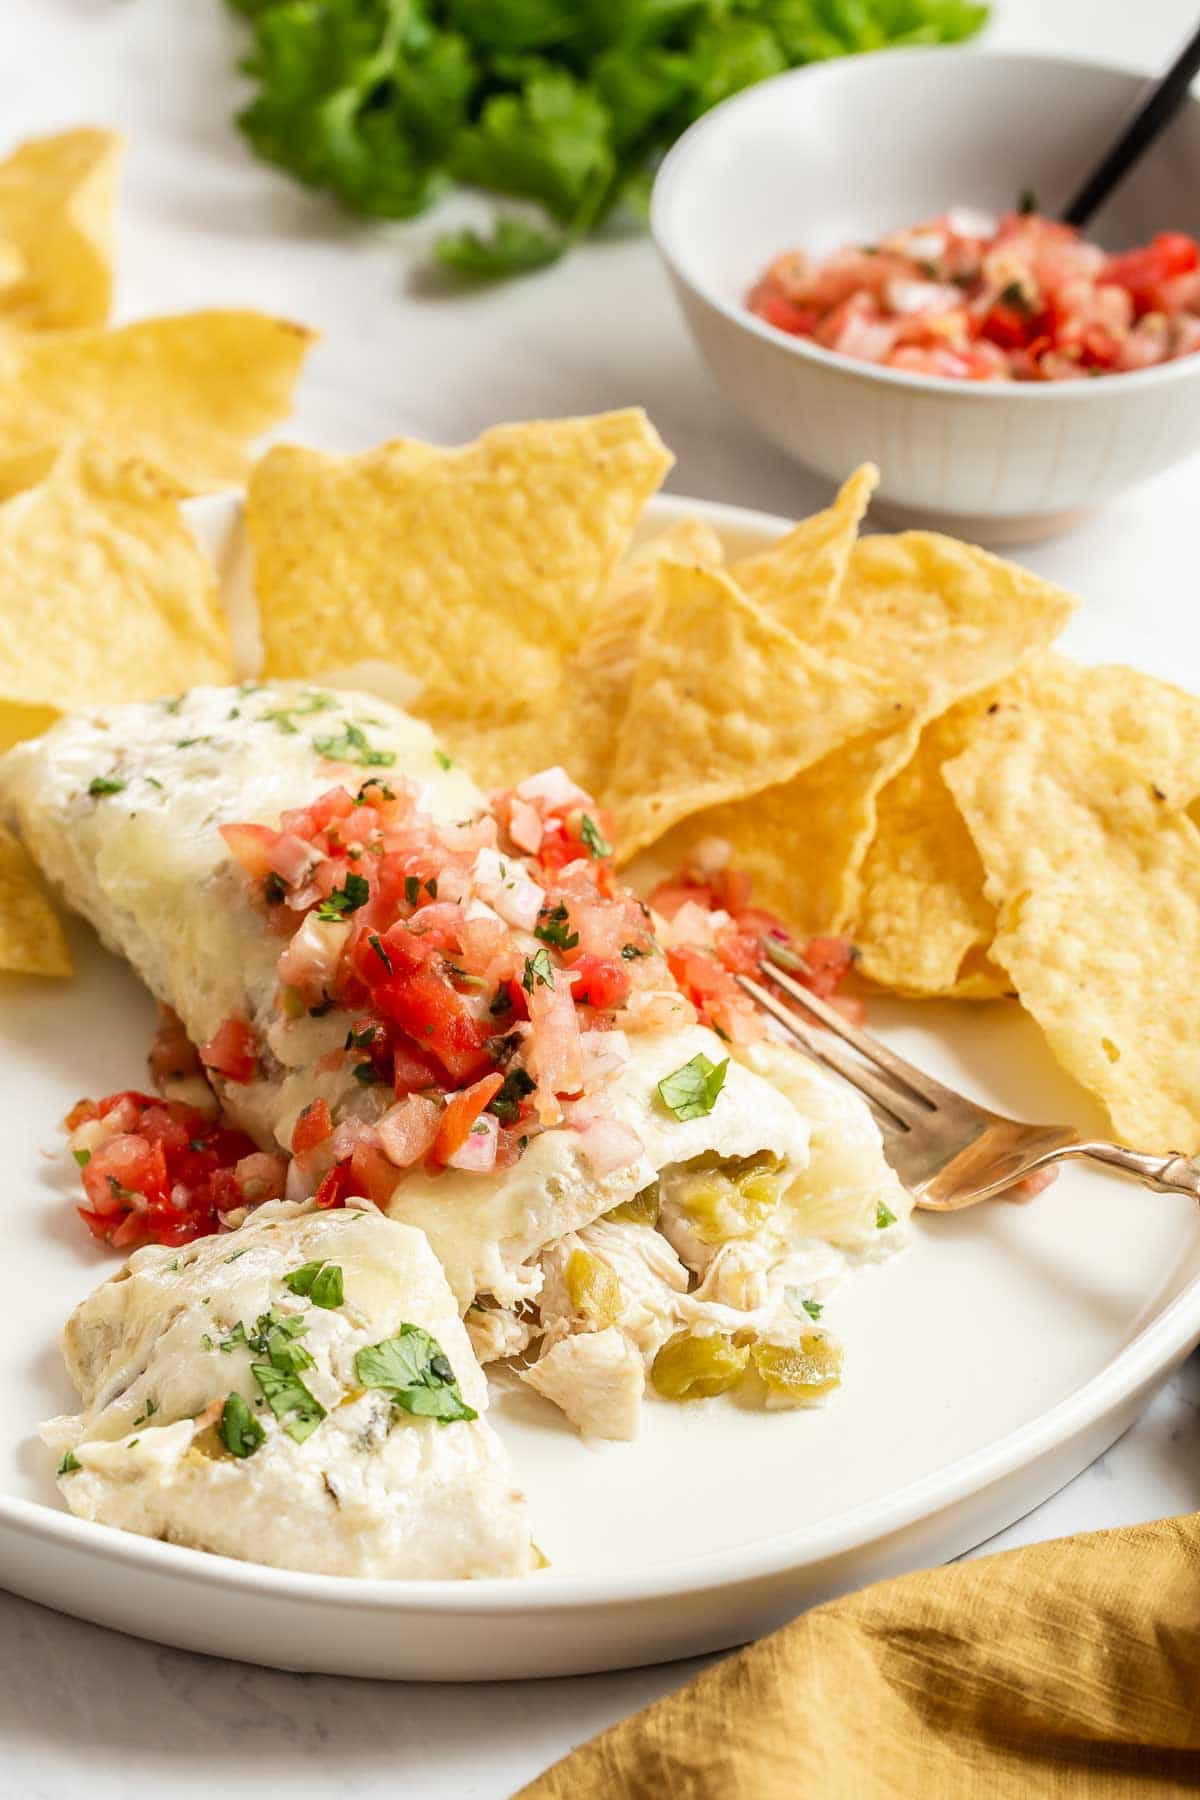 Creamy chicken enchiladas on plate with chips.